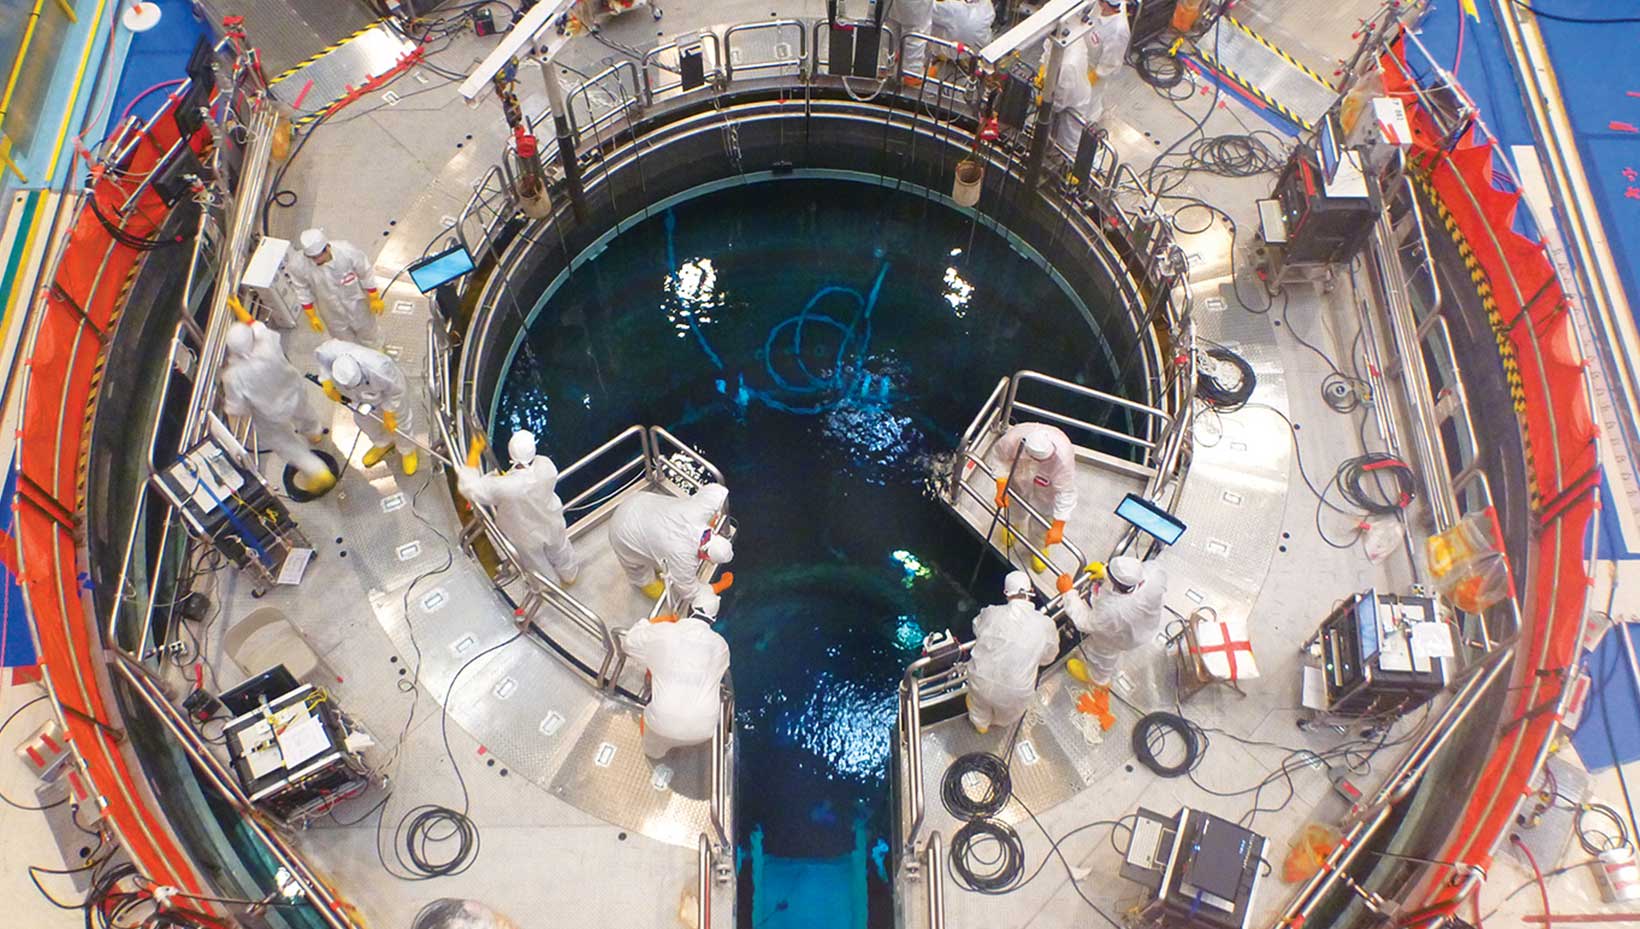 The reactor during a refueling outage at Plant Hatch